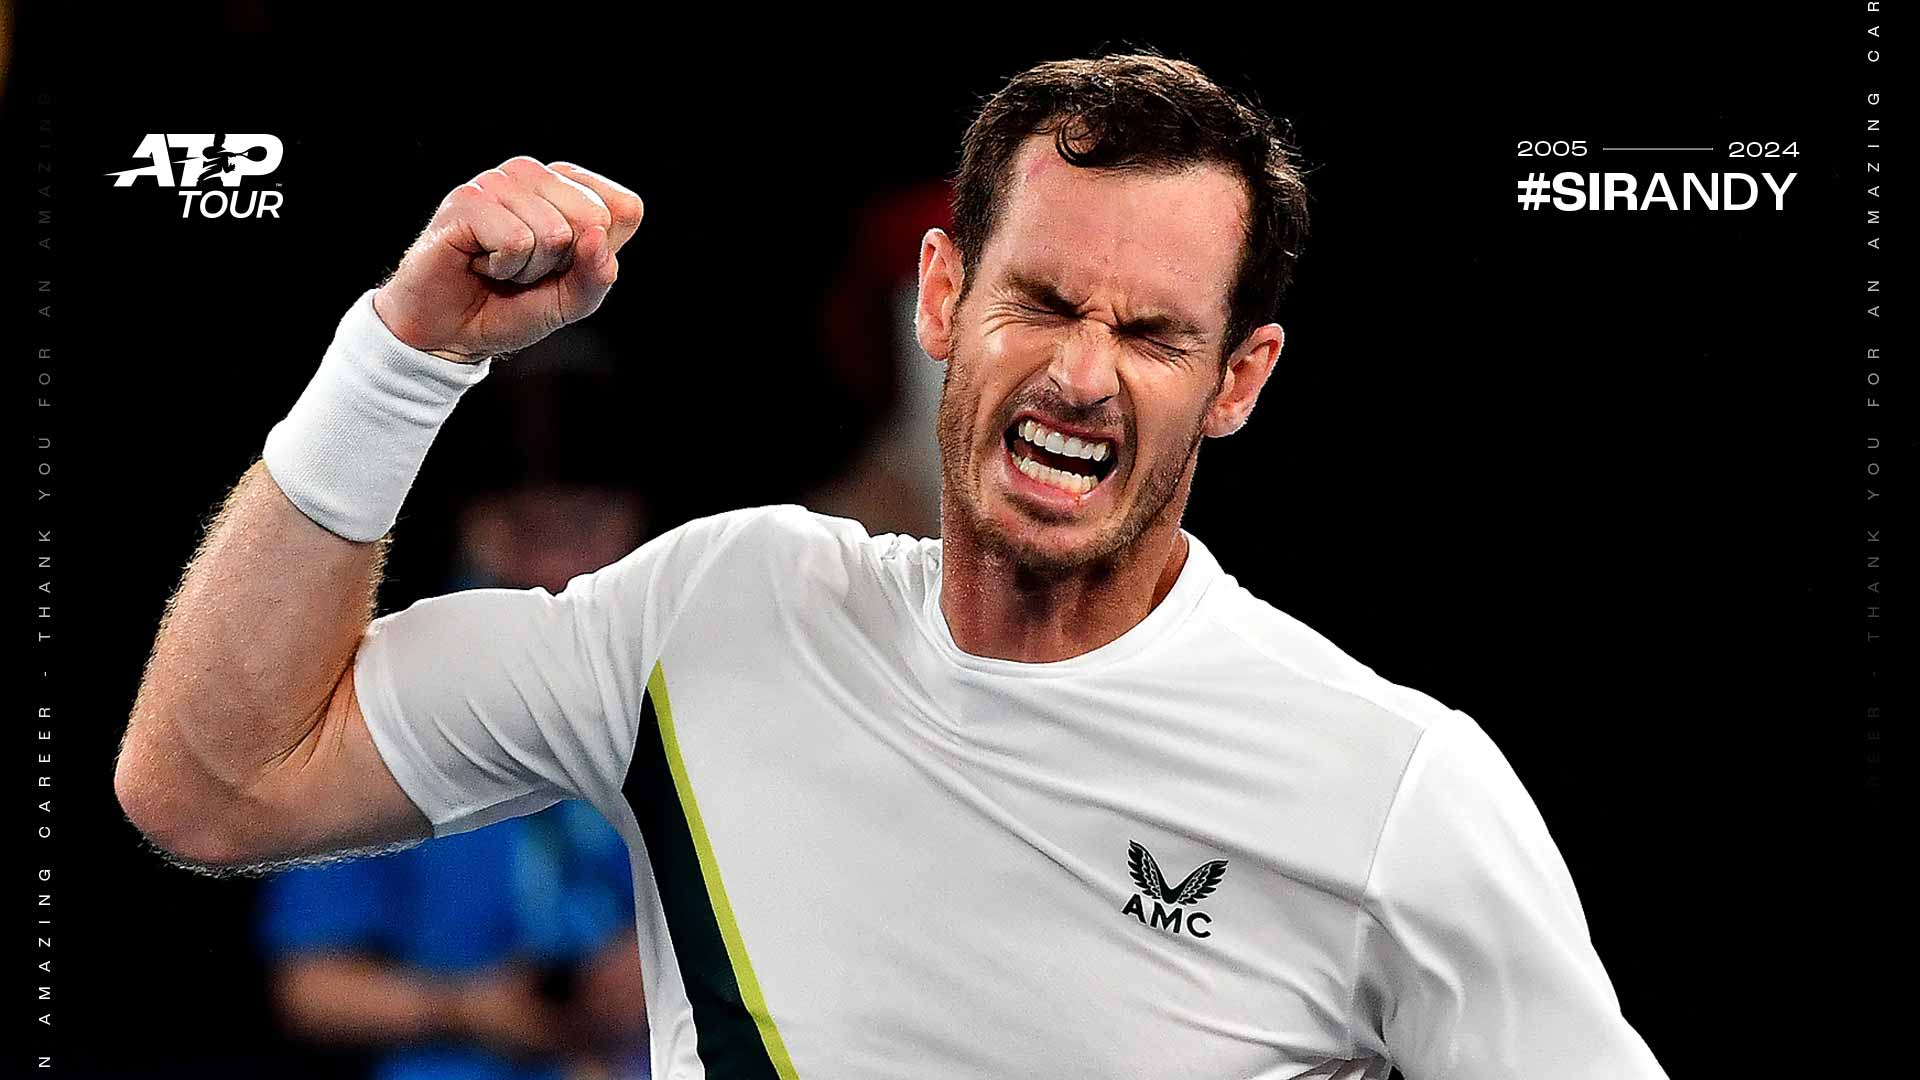 Murray’s most memorable on-court moments